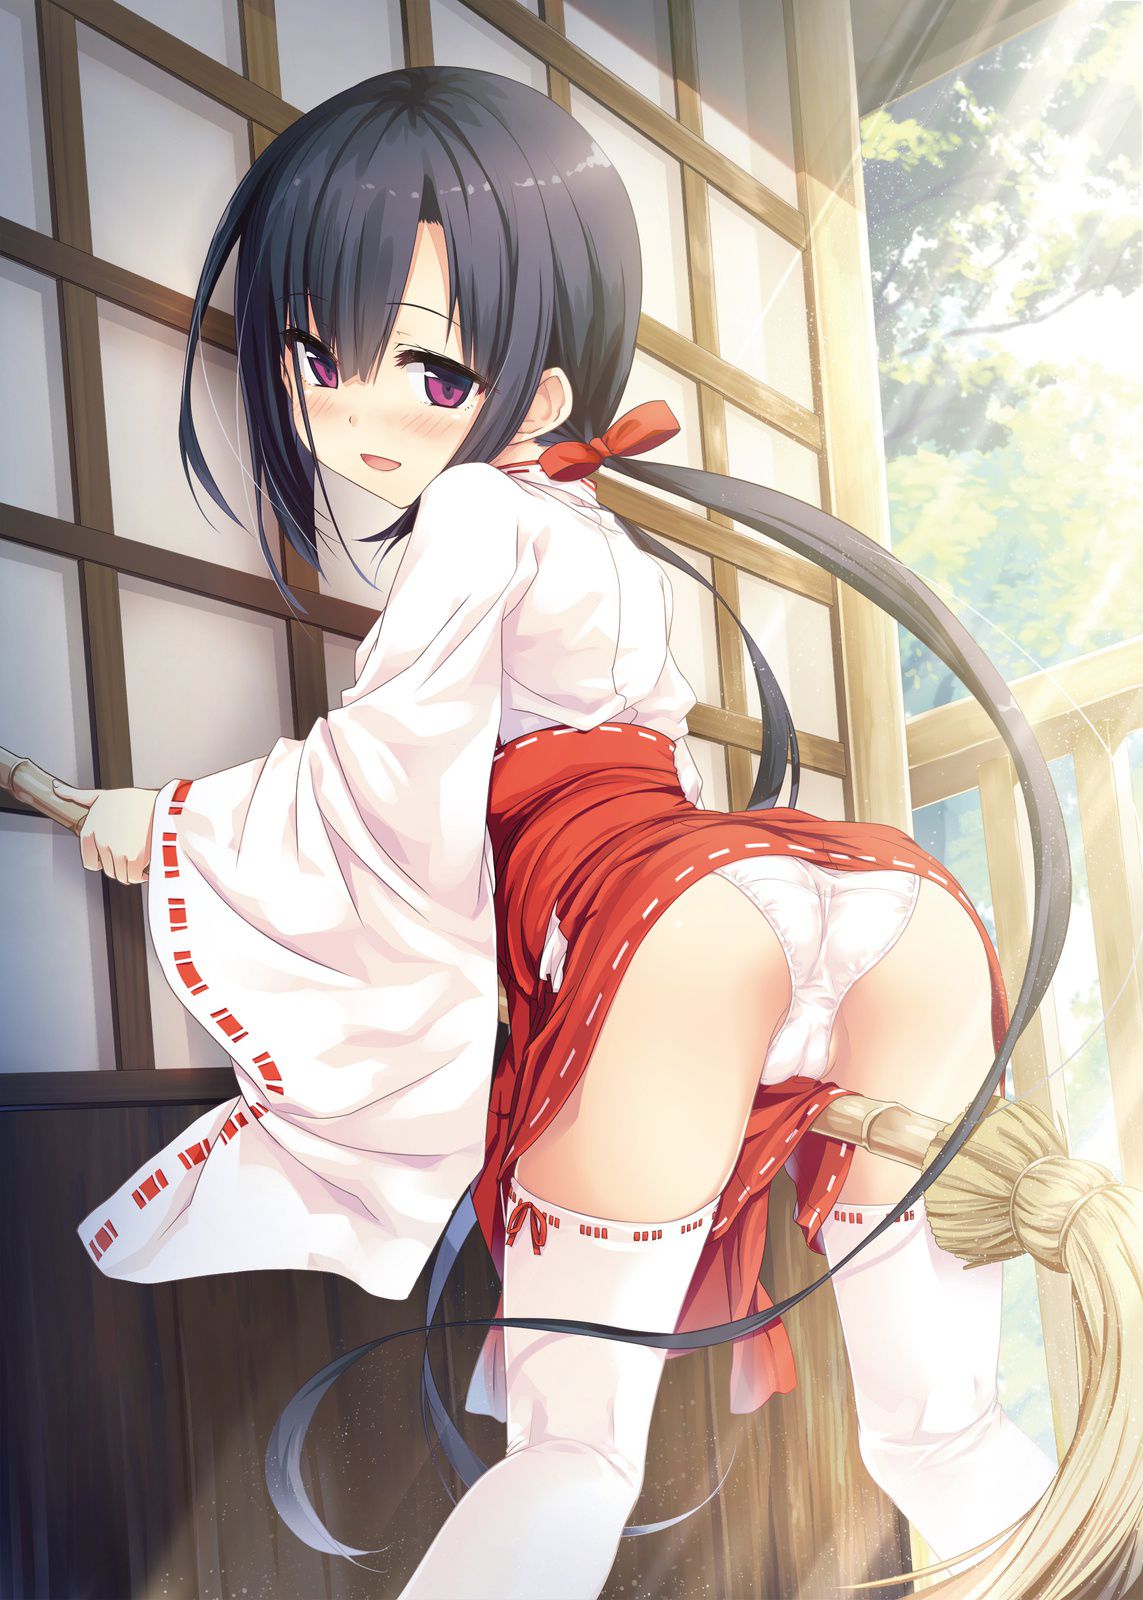 I remembered the play that Loli girl can not go♪-dimensional erotic image w in the masturbation of the loli girl 18